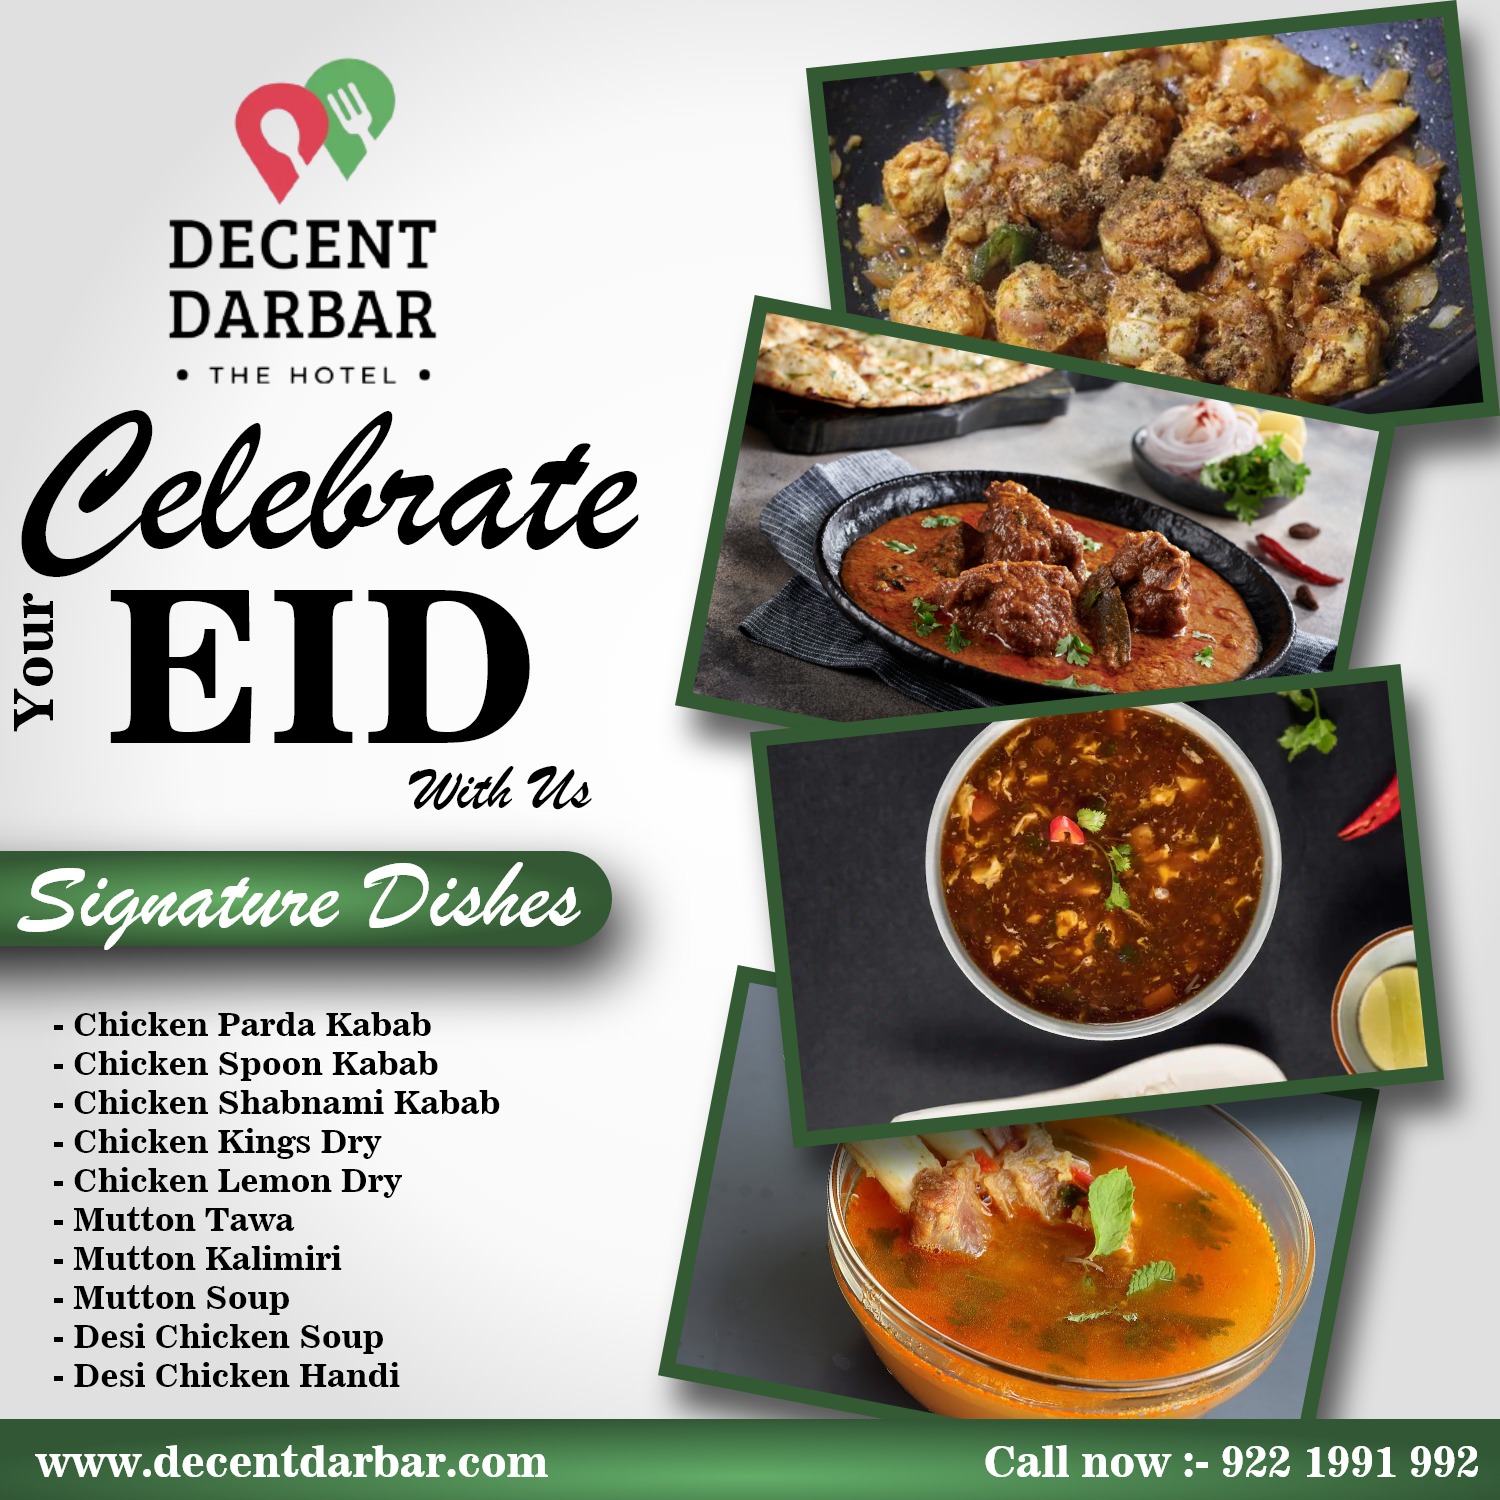 🎉🕌 Celebrate Eid in style at Decent Darbar - The